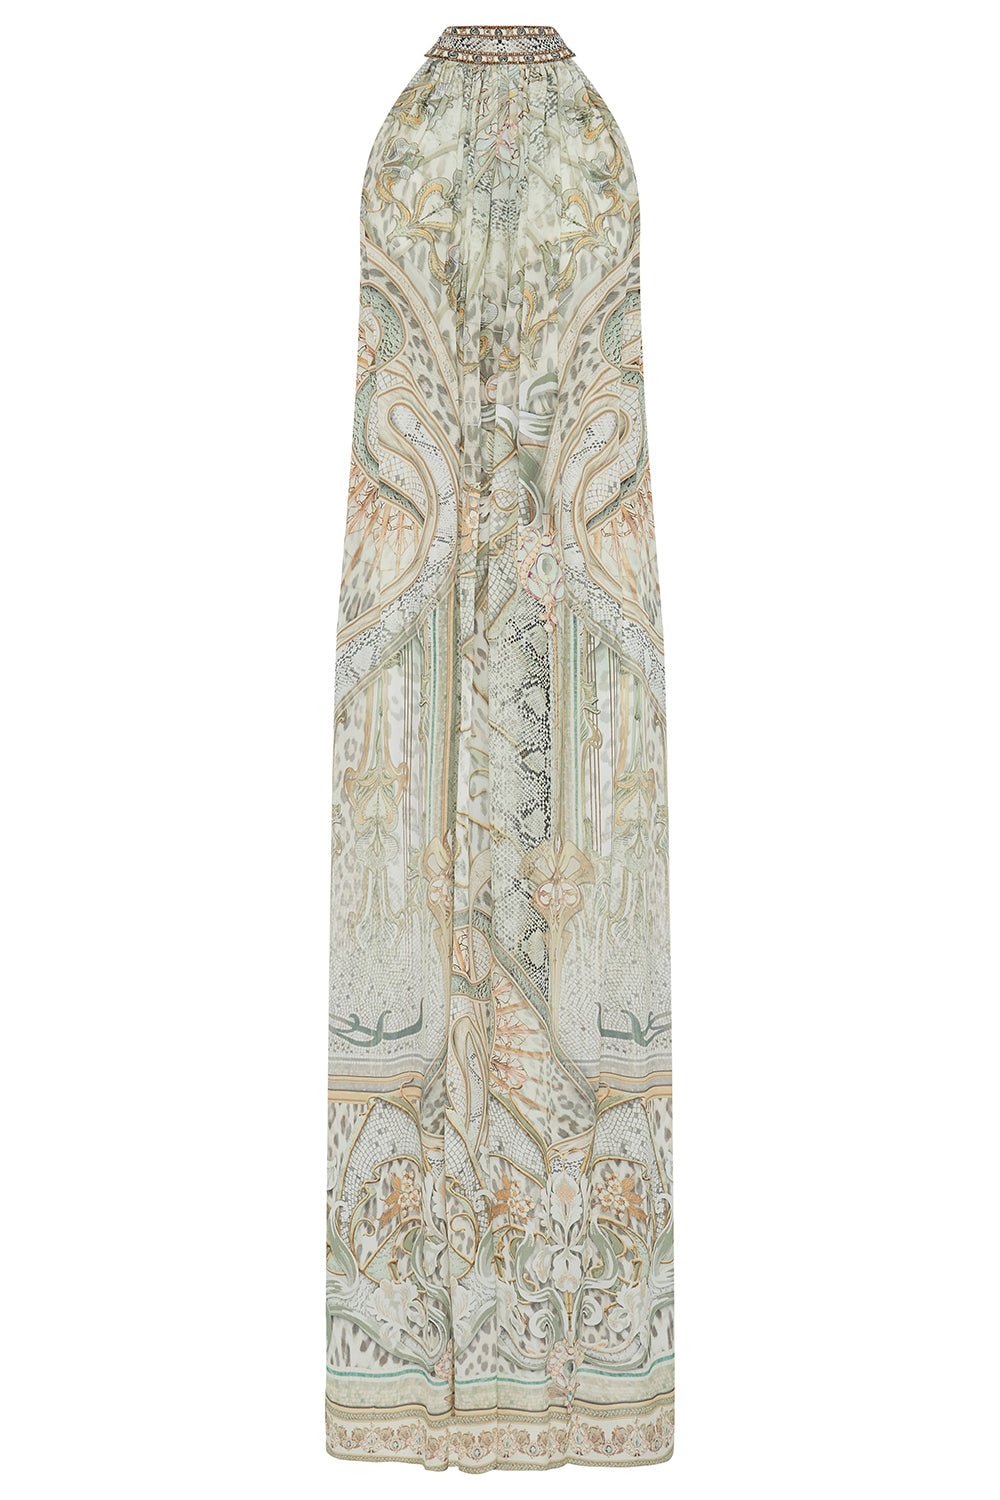 CAMILLA-Tie Neck Long Dress-IVORY TOWER TALES